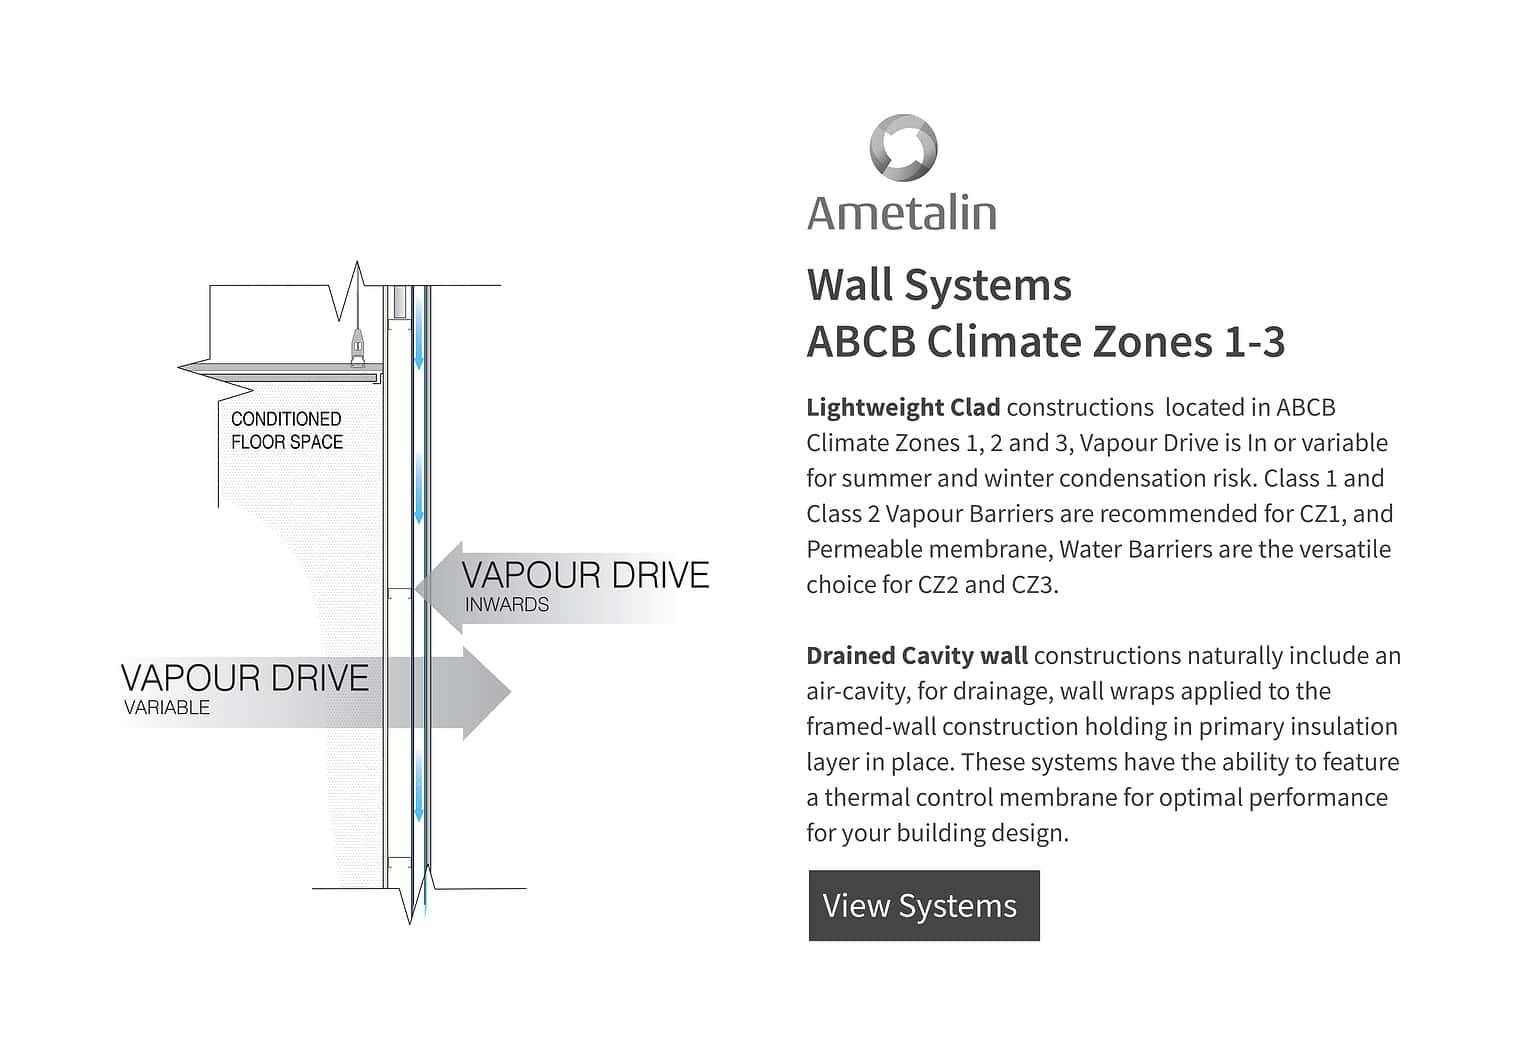 Wall Systems ABCB Climate Zones 1-3